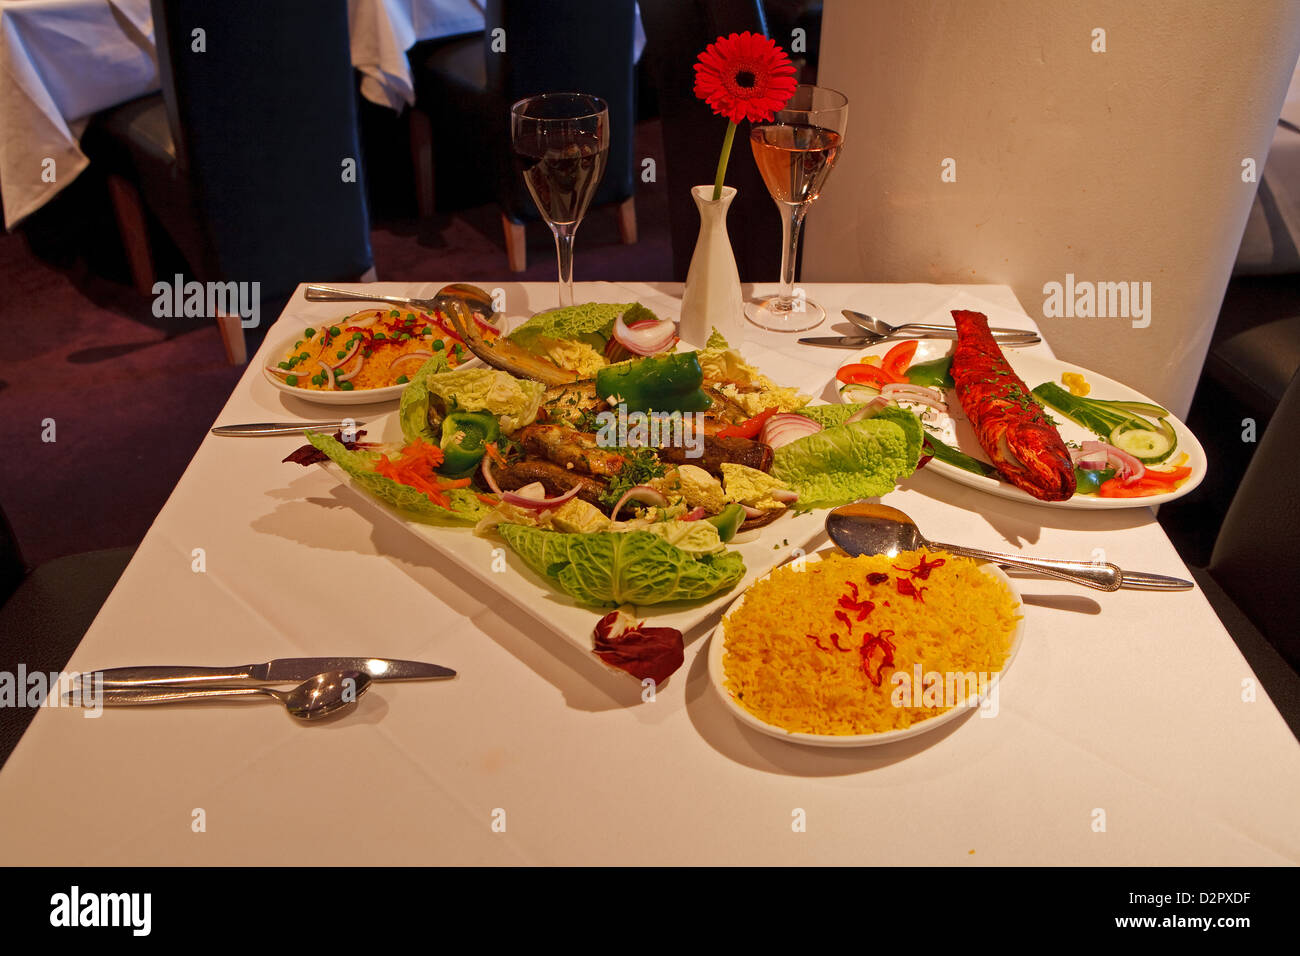 Colourful Indian food on a table in a restaurant Stock Photo